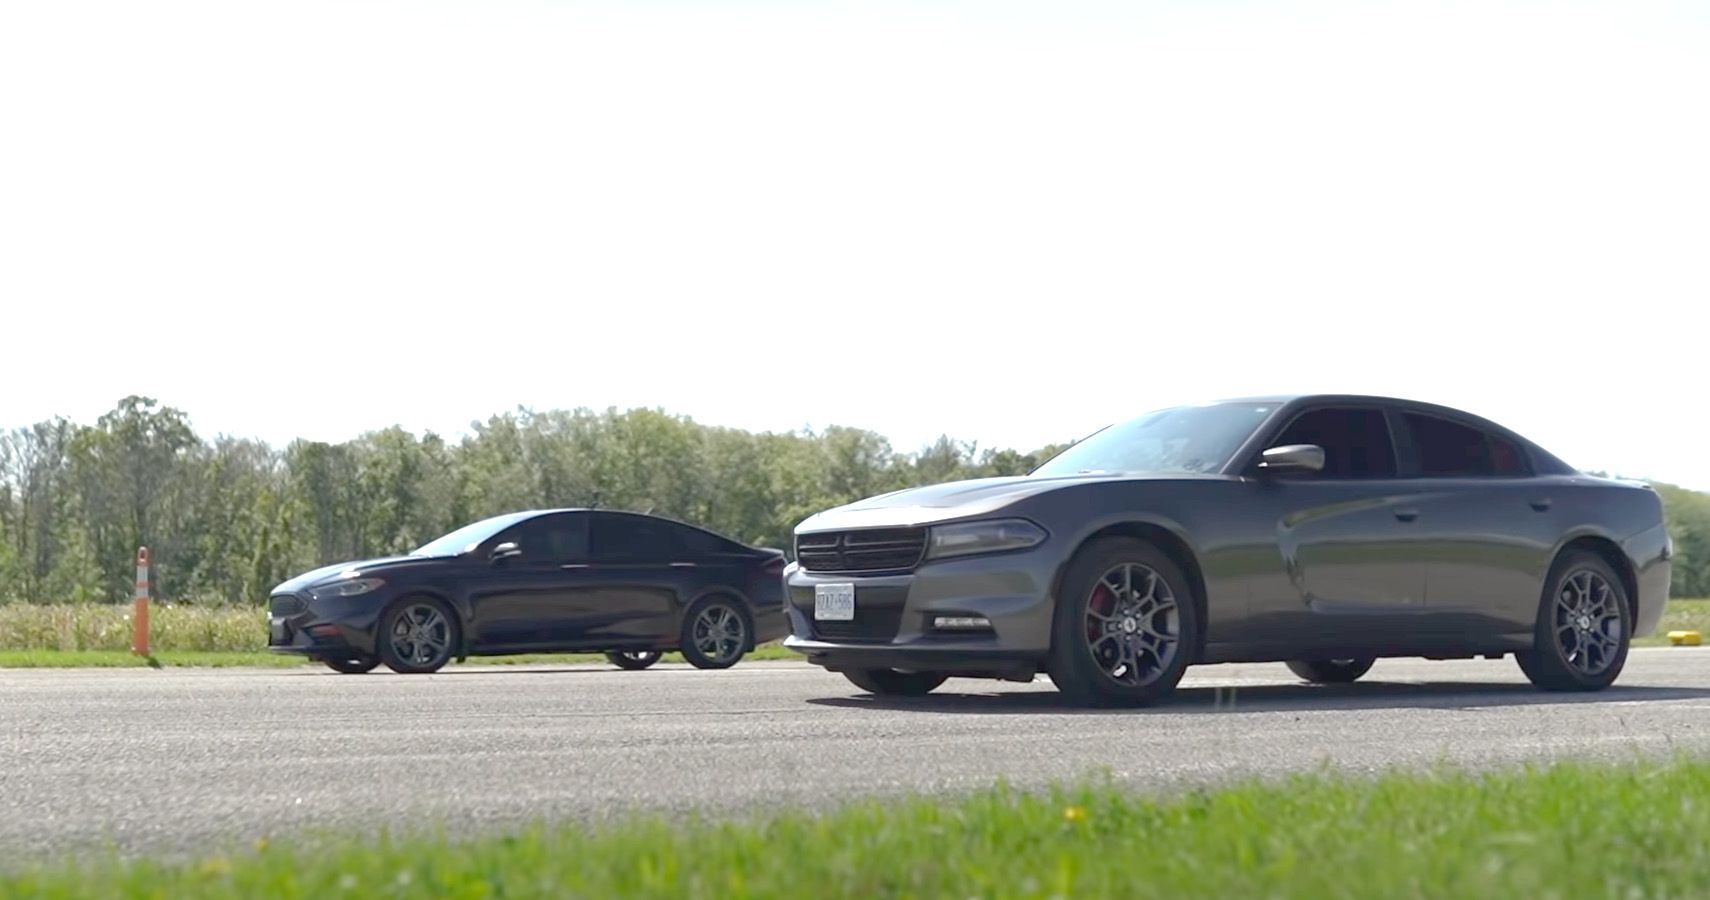 Dodge Charger and Ford Fusion line up on highway